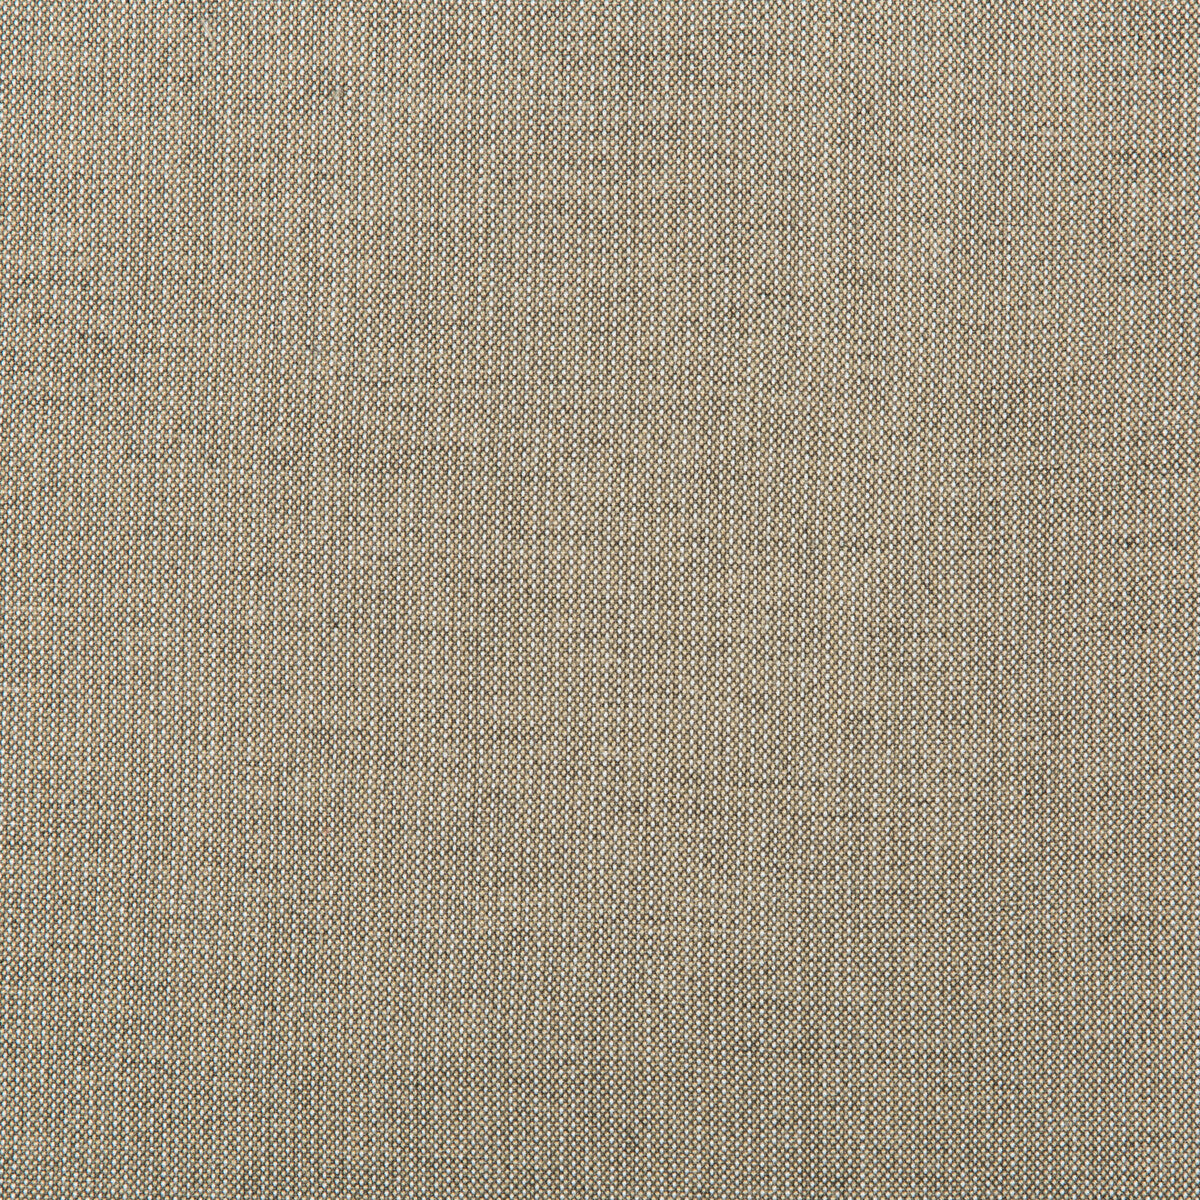 Kravet Basics fabric in 36820-106 color - pattern 36820.106.0 - by Kravet Basics in the Indoor / Outdoor collection